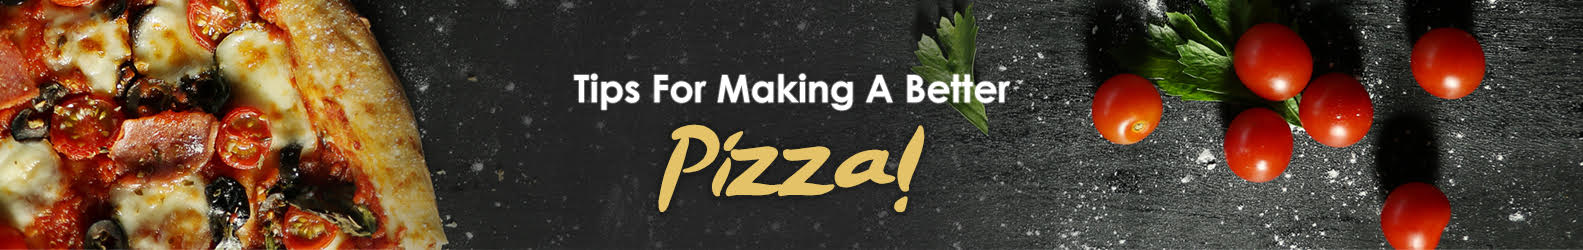 Tips for Making Pizza